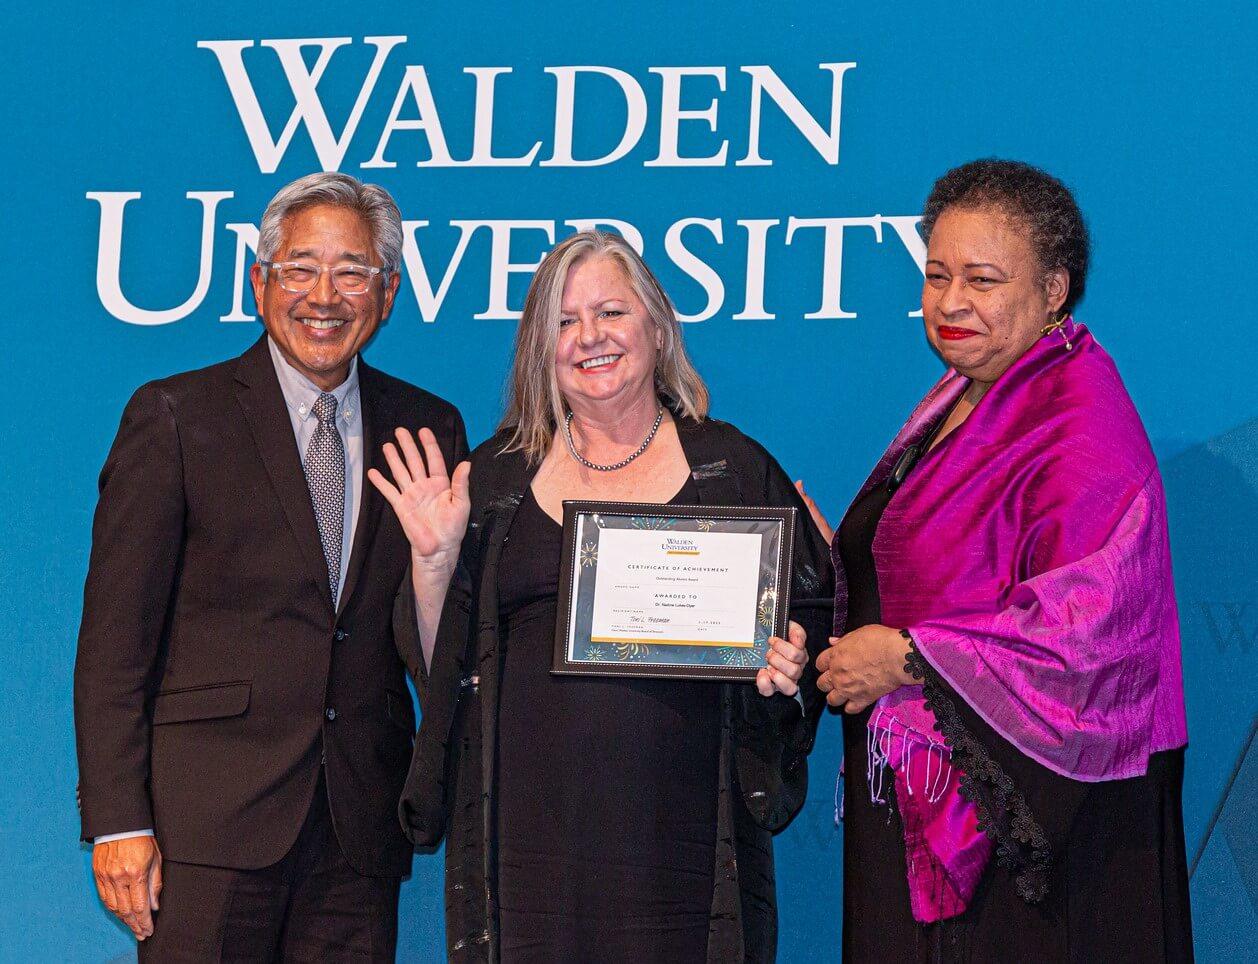 Dr. Nadine Lukes-Dyer (center) receives the Outstanding Alumni Award from Board of Directors Chair Toni Freeman (right) and board member John Kobara (left).